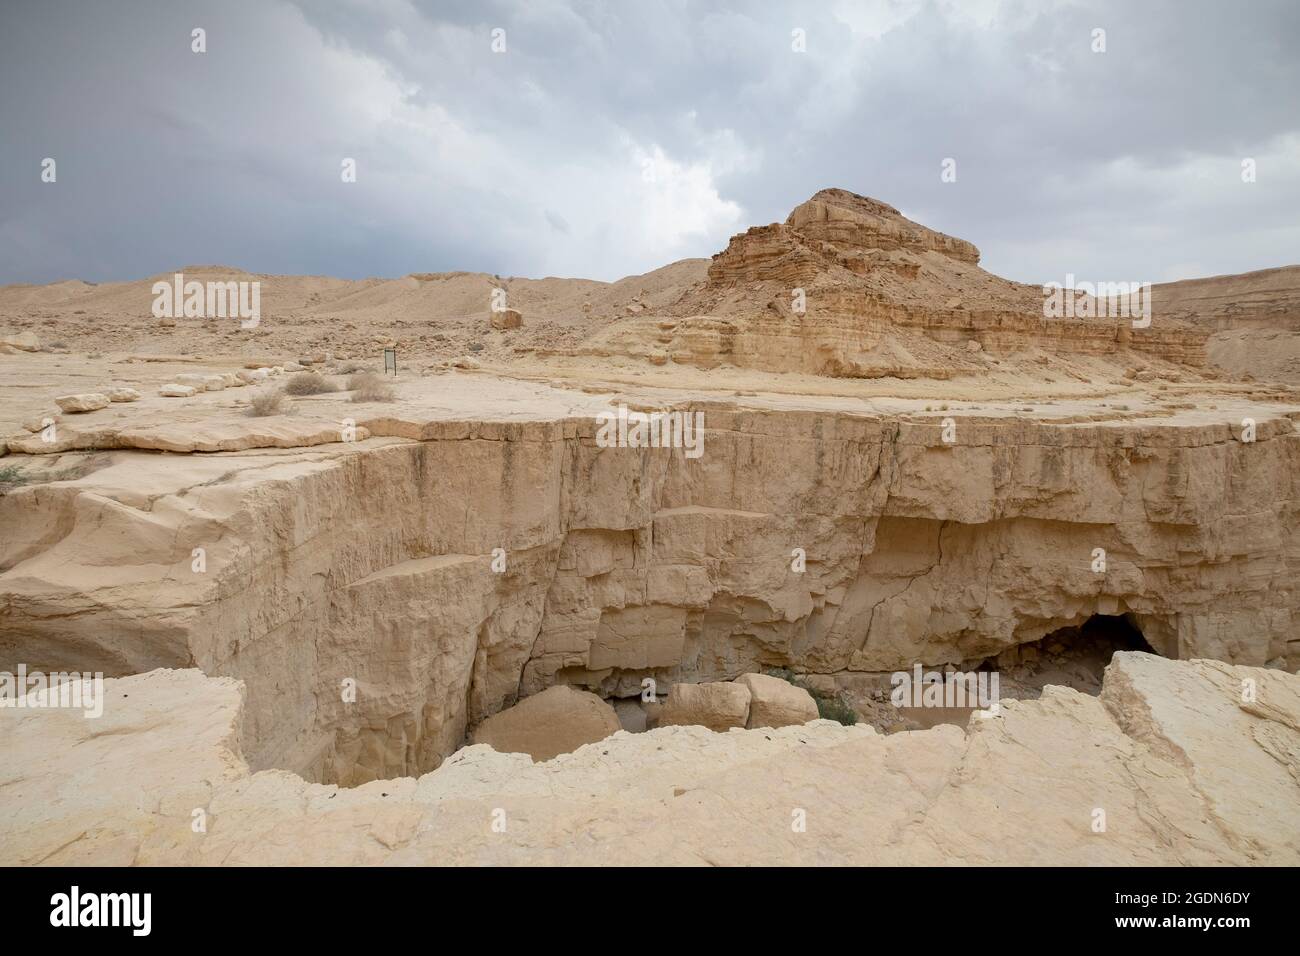 A deep dry river gorge cut in the dry Marl sandstone by flood water. The only water that flows into the Dead Sea, Israel Stock Photo